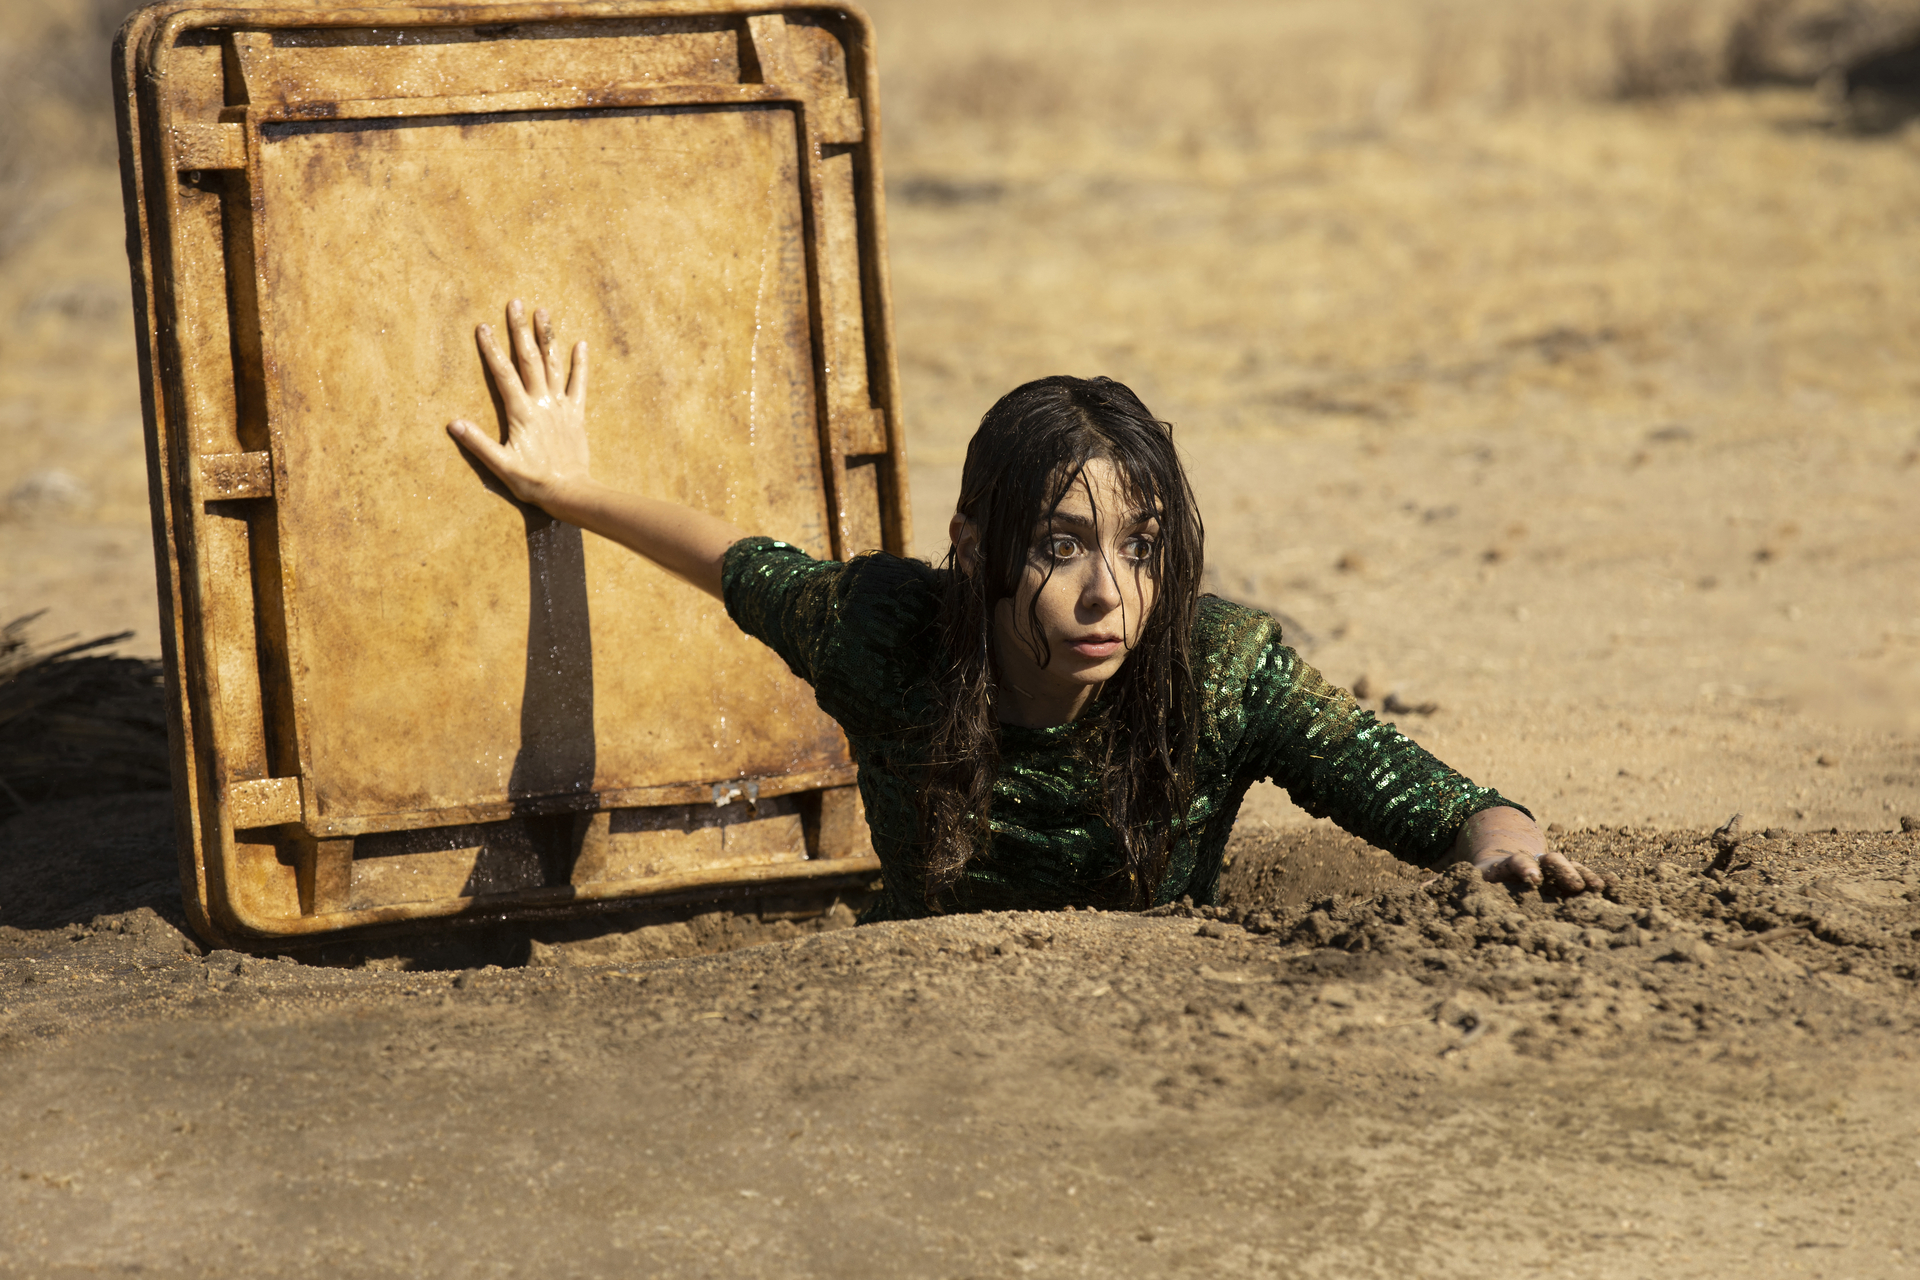 Cristin Milioti as Hazel in Made for Love, climbing out of the metal hatch to an underground waterway in the desert.